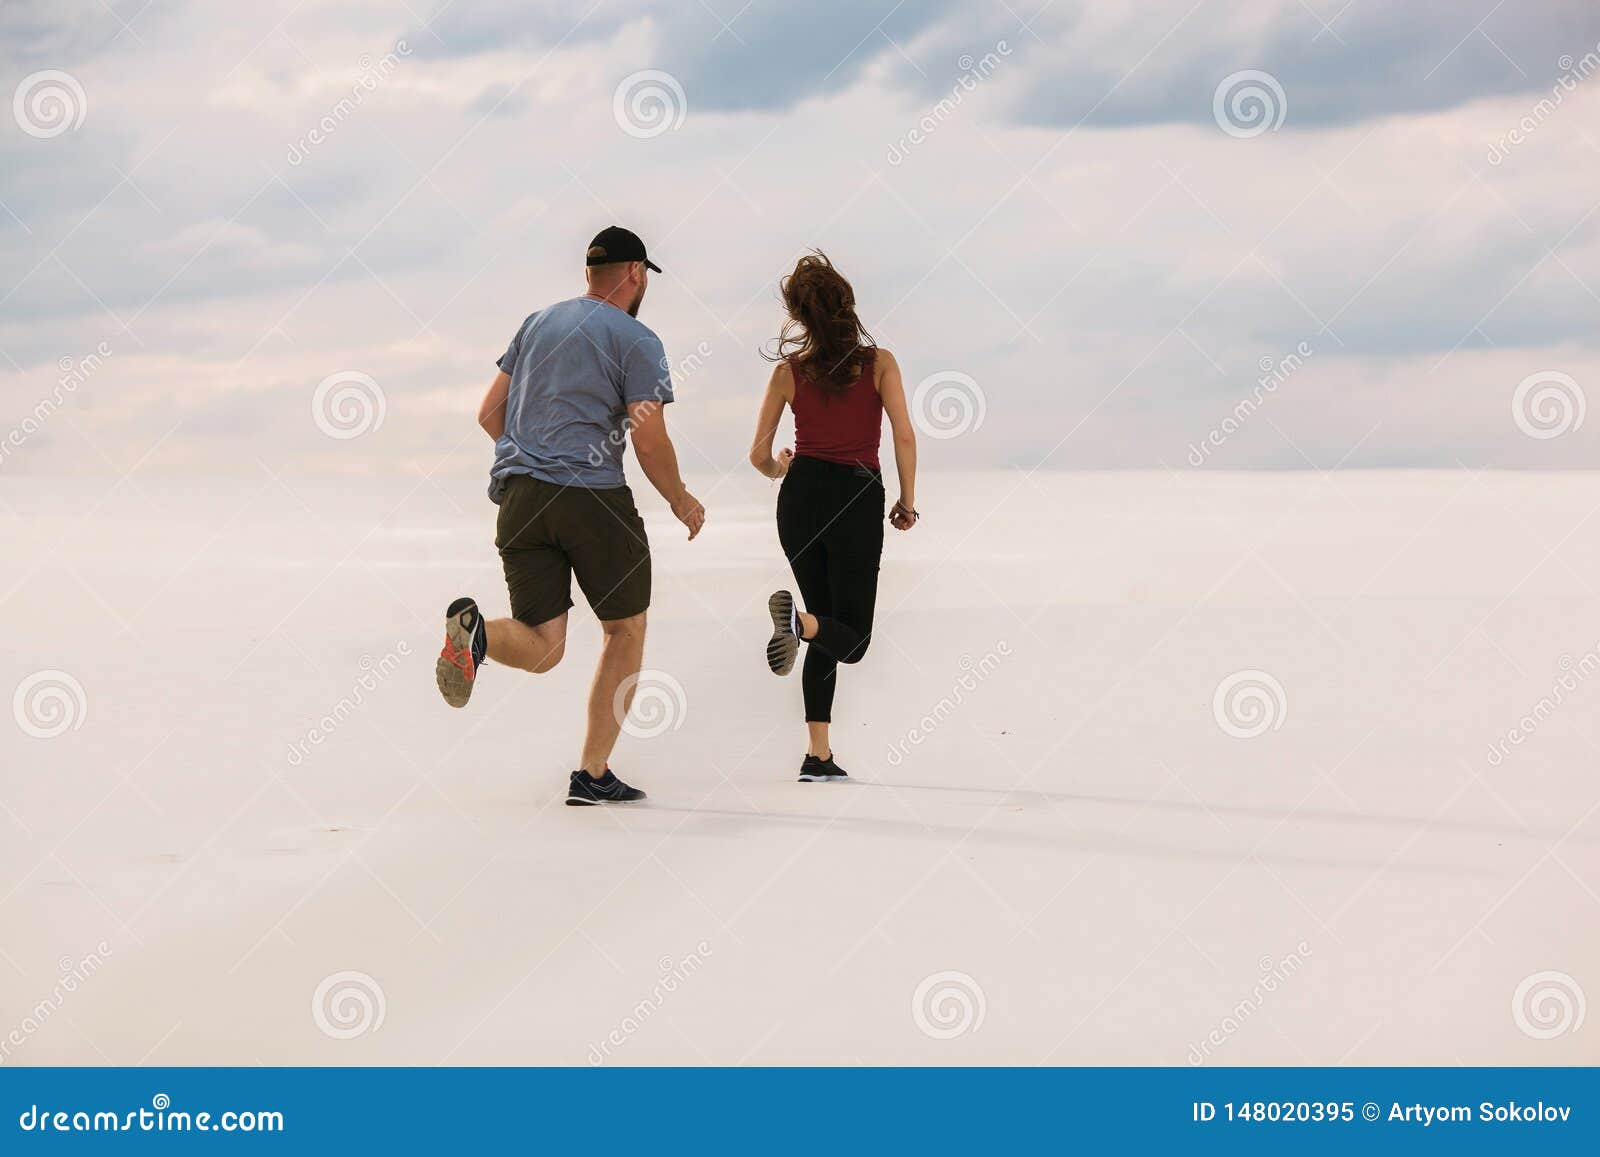 The Girl Runs Away from the Guy in the Desert, the Man Wants To Catch Up  with Her, the Girl is Afraid and Runs Away from Him Stock Image - Image of